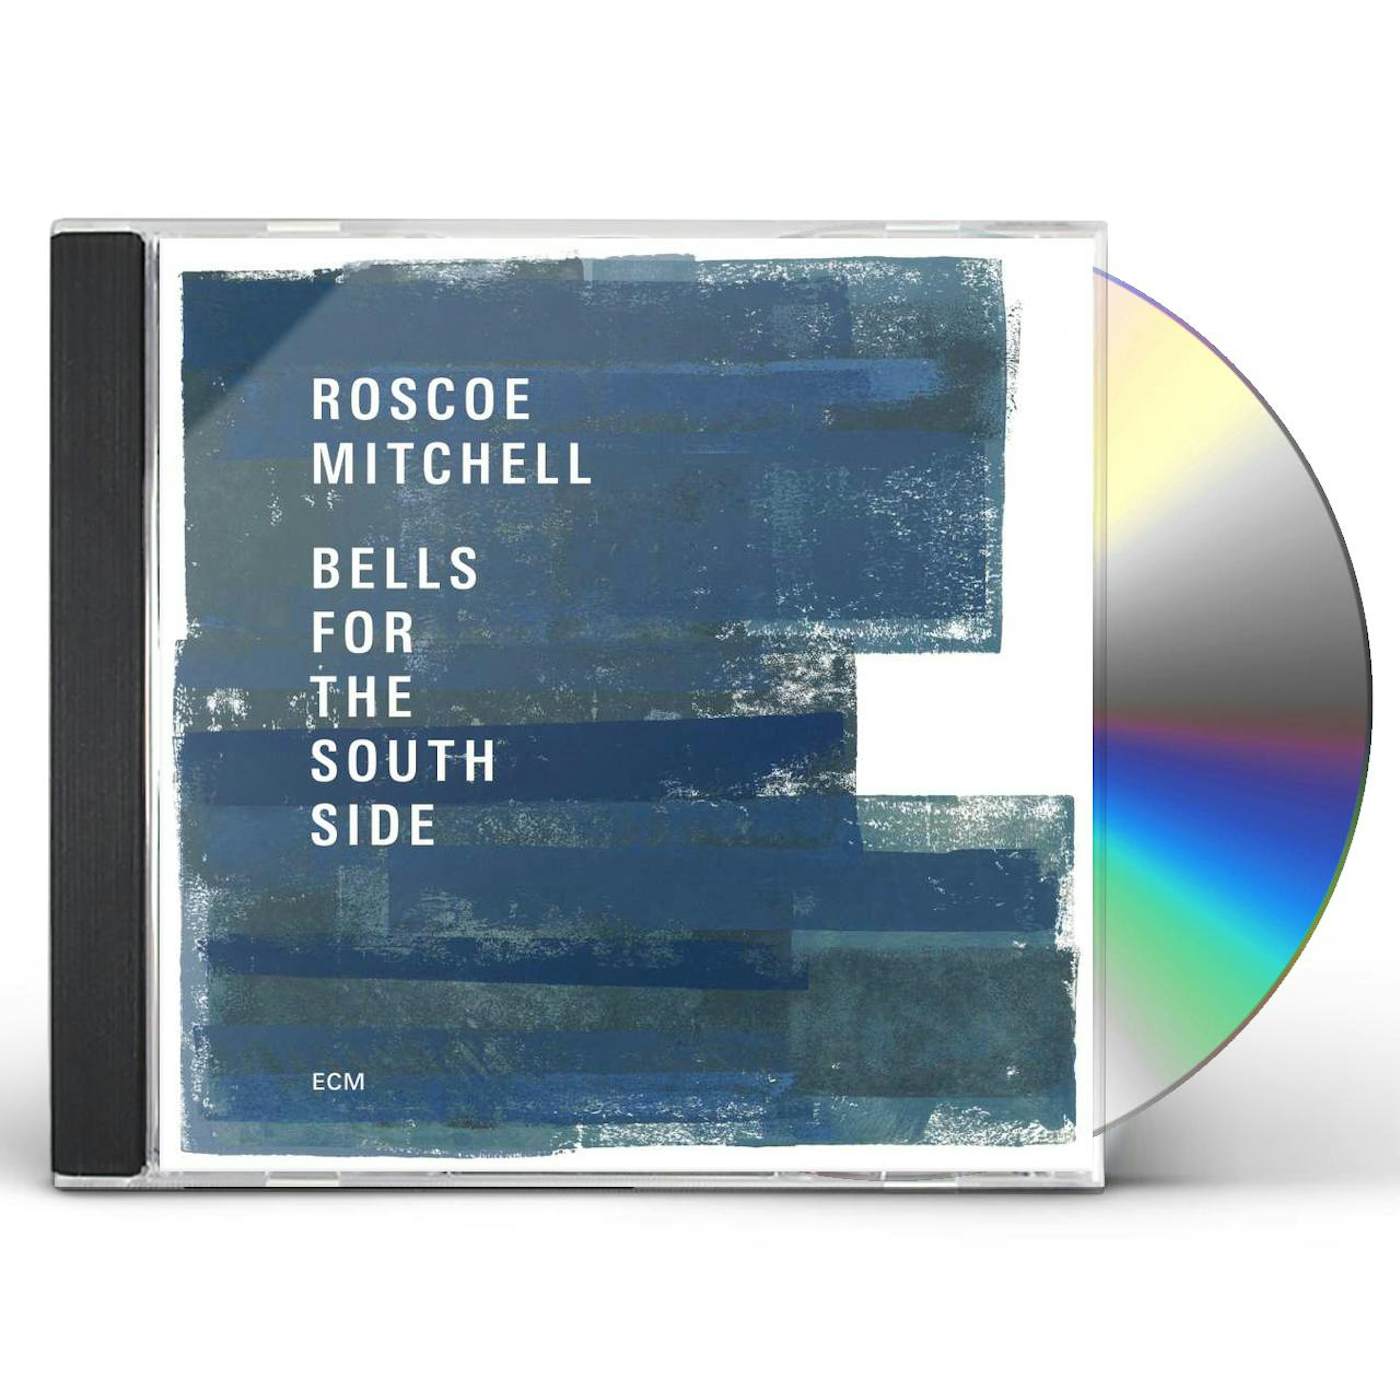 Roscoe Mitchell BELLS FOR THE SOUTH SIDE CD